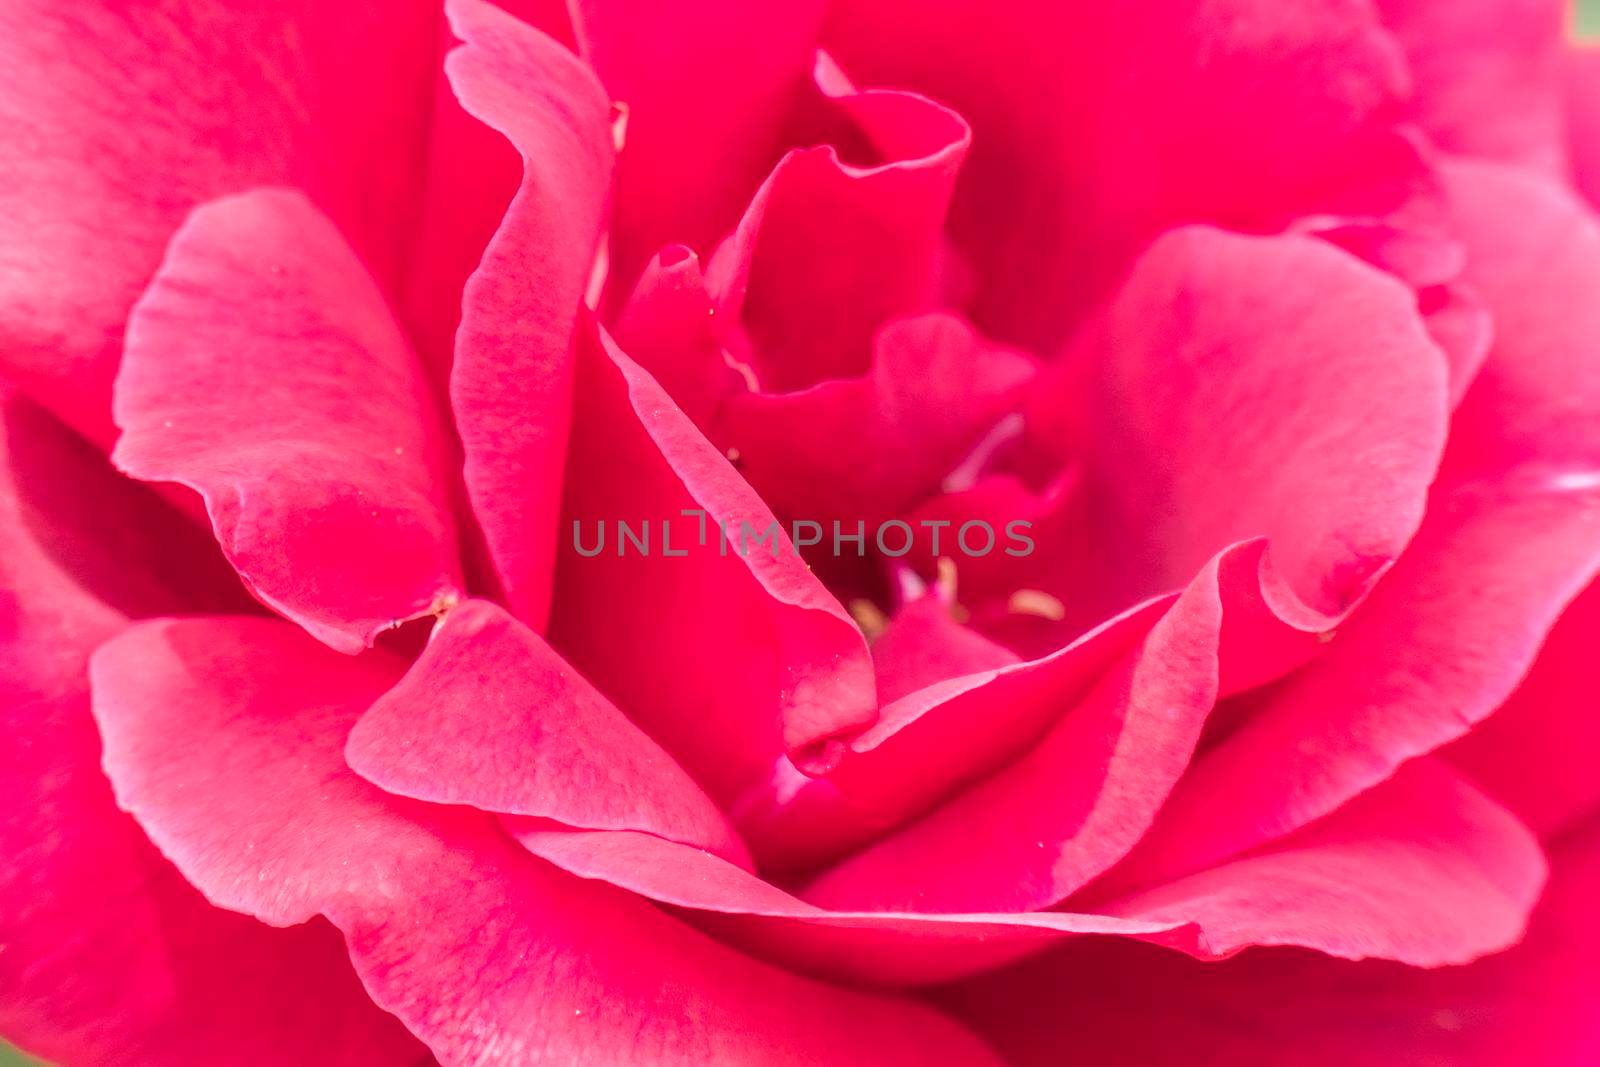 Petals of a pretty rose flower very close by max8xam